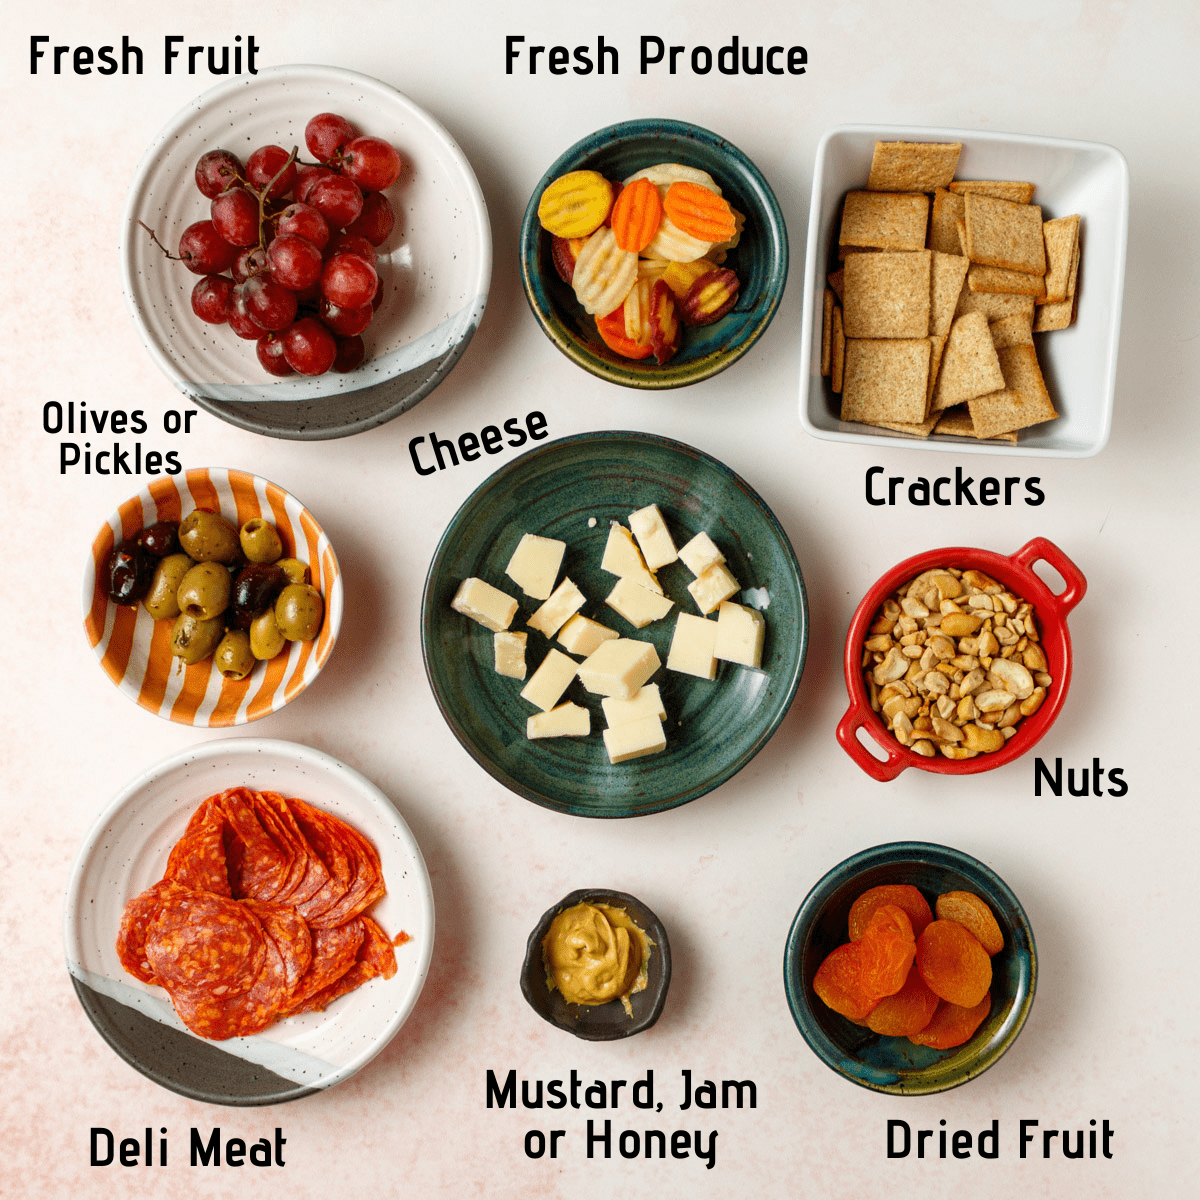 https://smackofflavor.com/wp-content/uploads/2023/01/Adult-Lunchables-Ingredients.png